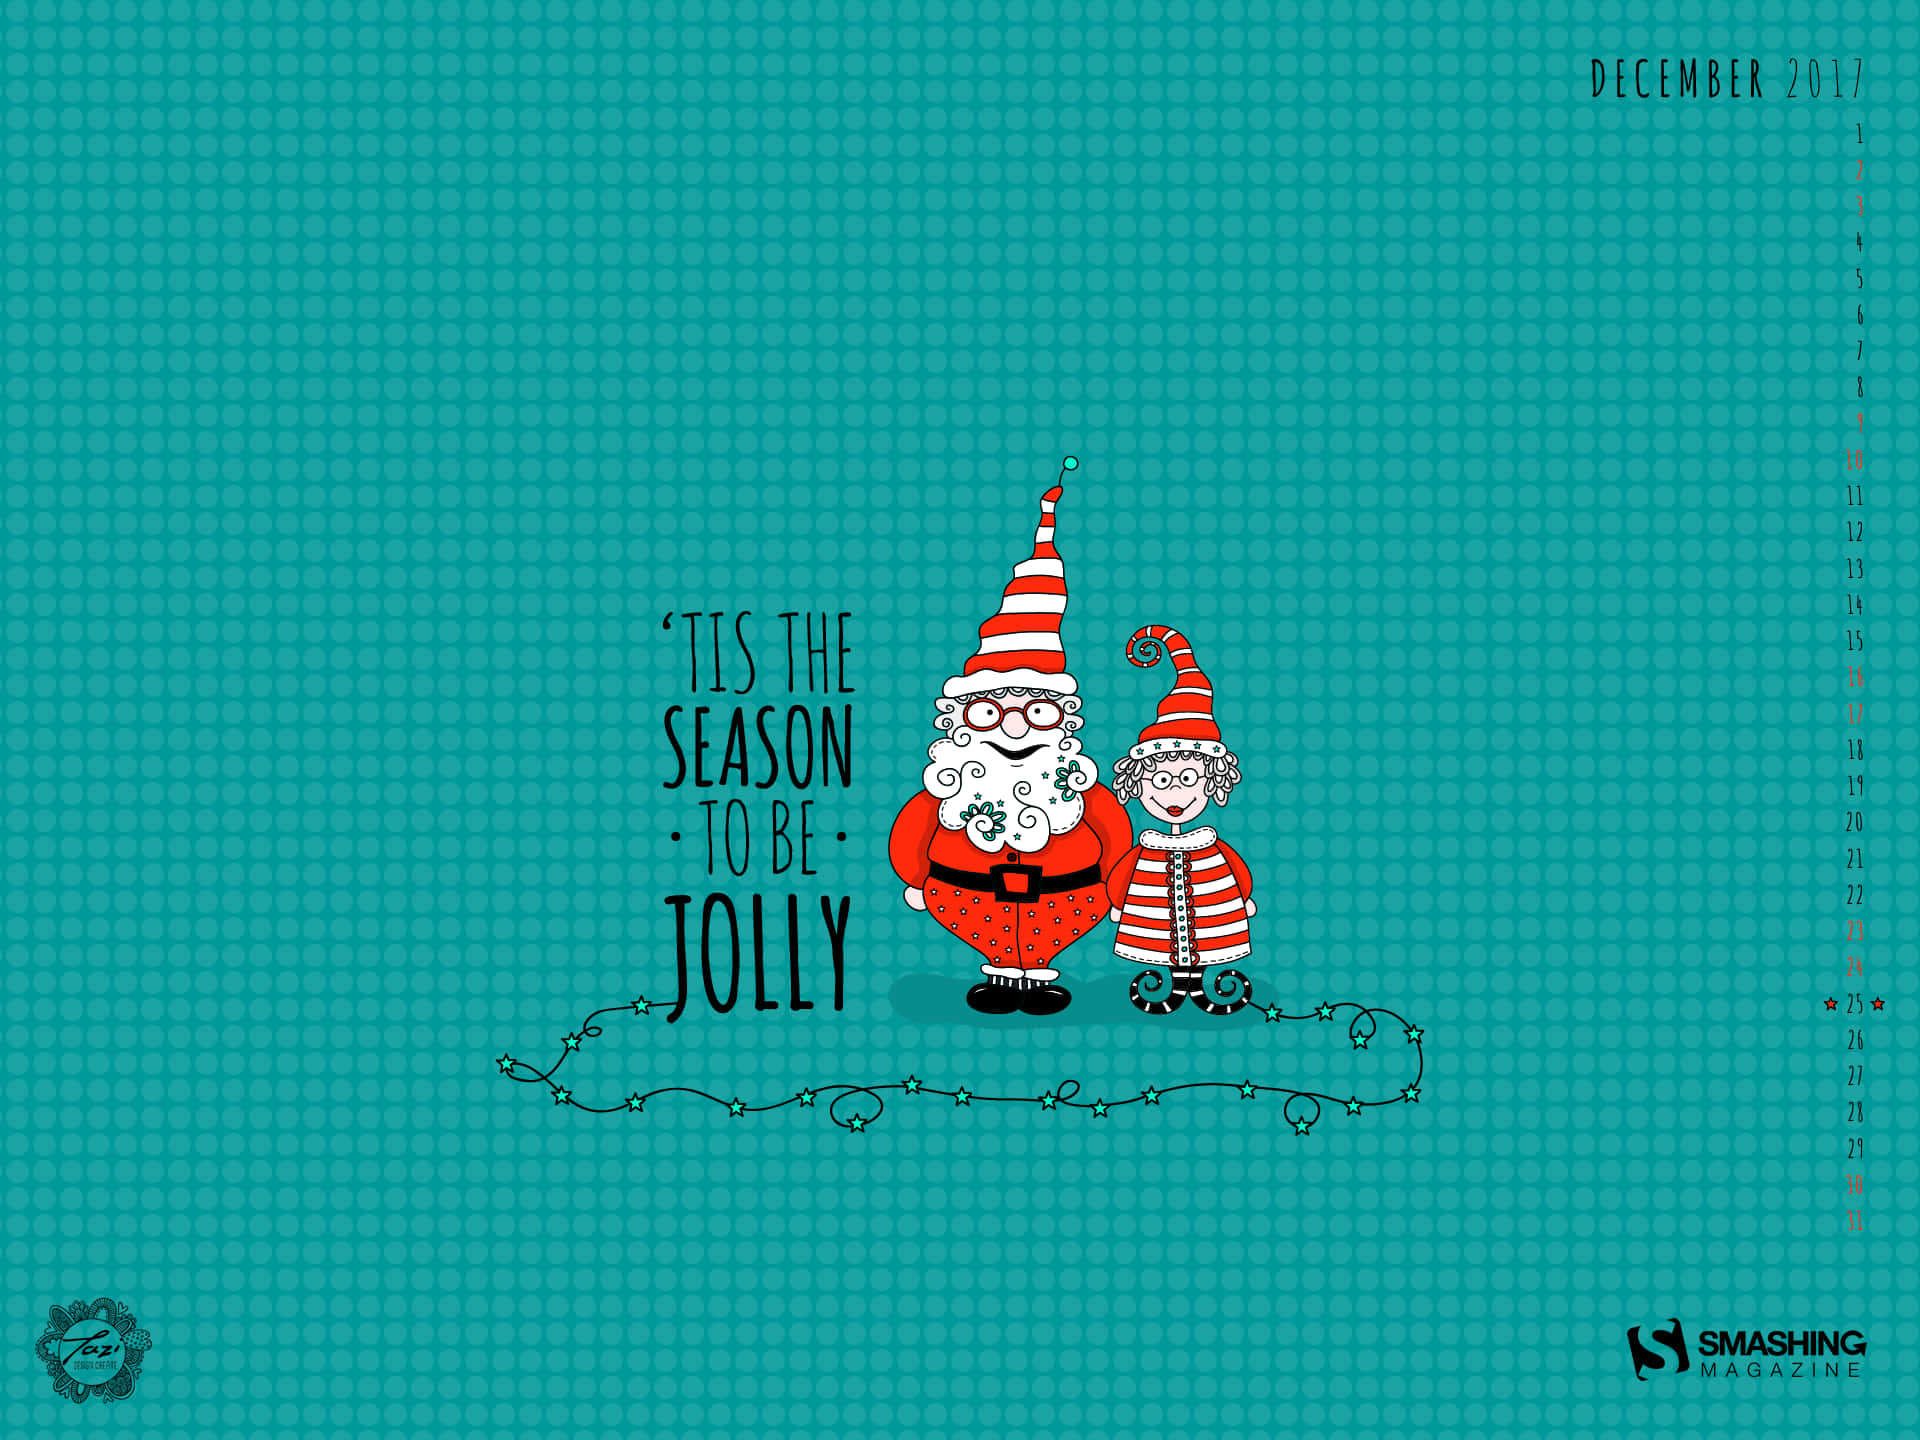 Let's get ready for the cozy months of December! Wallpaper